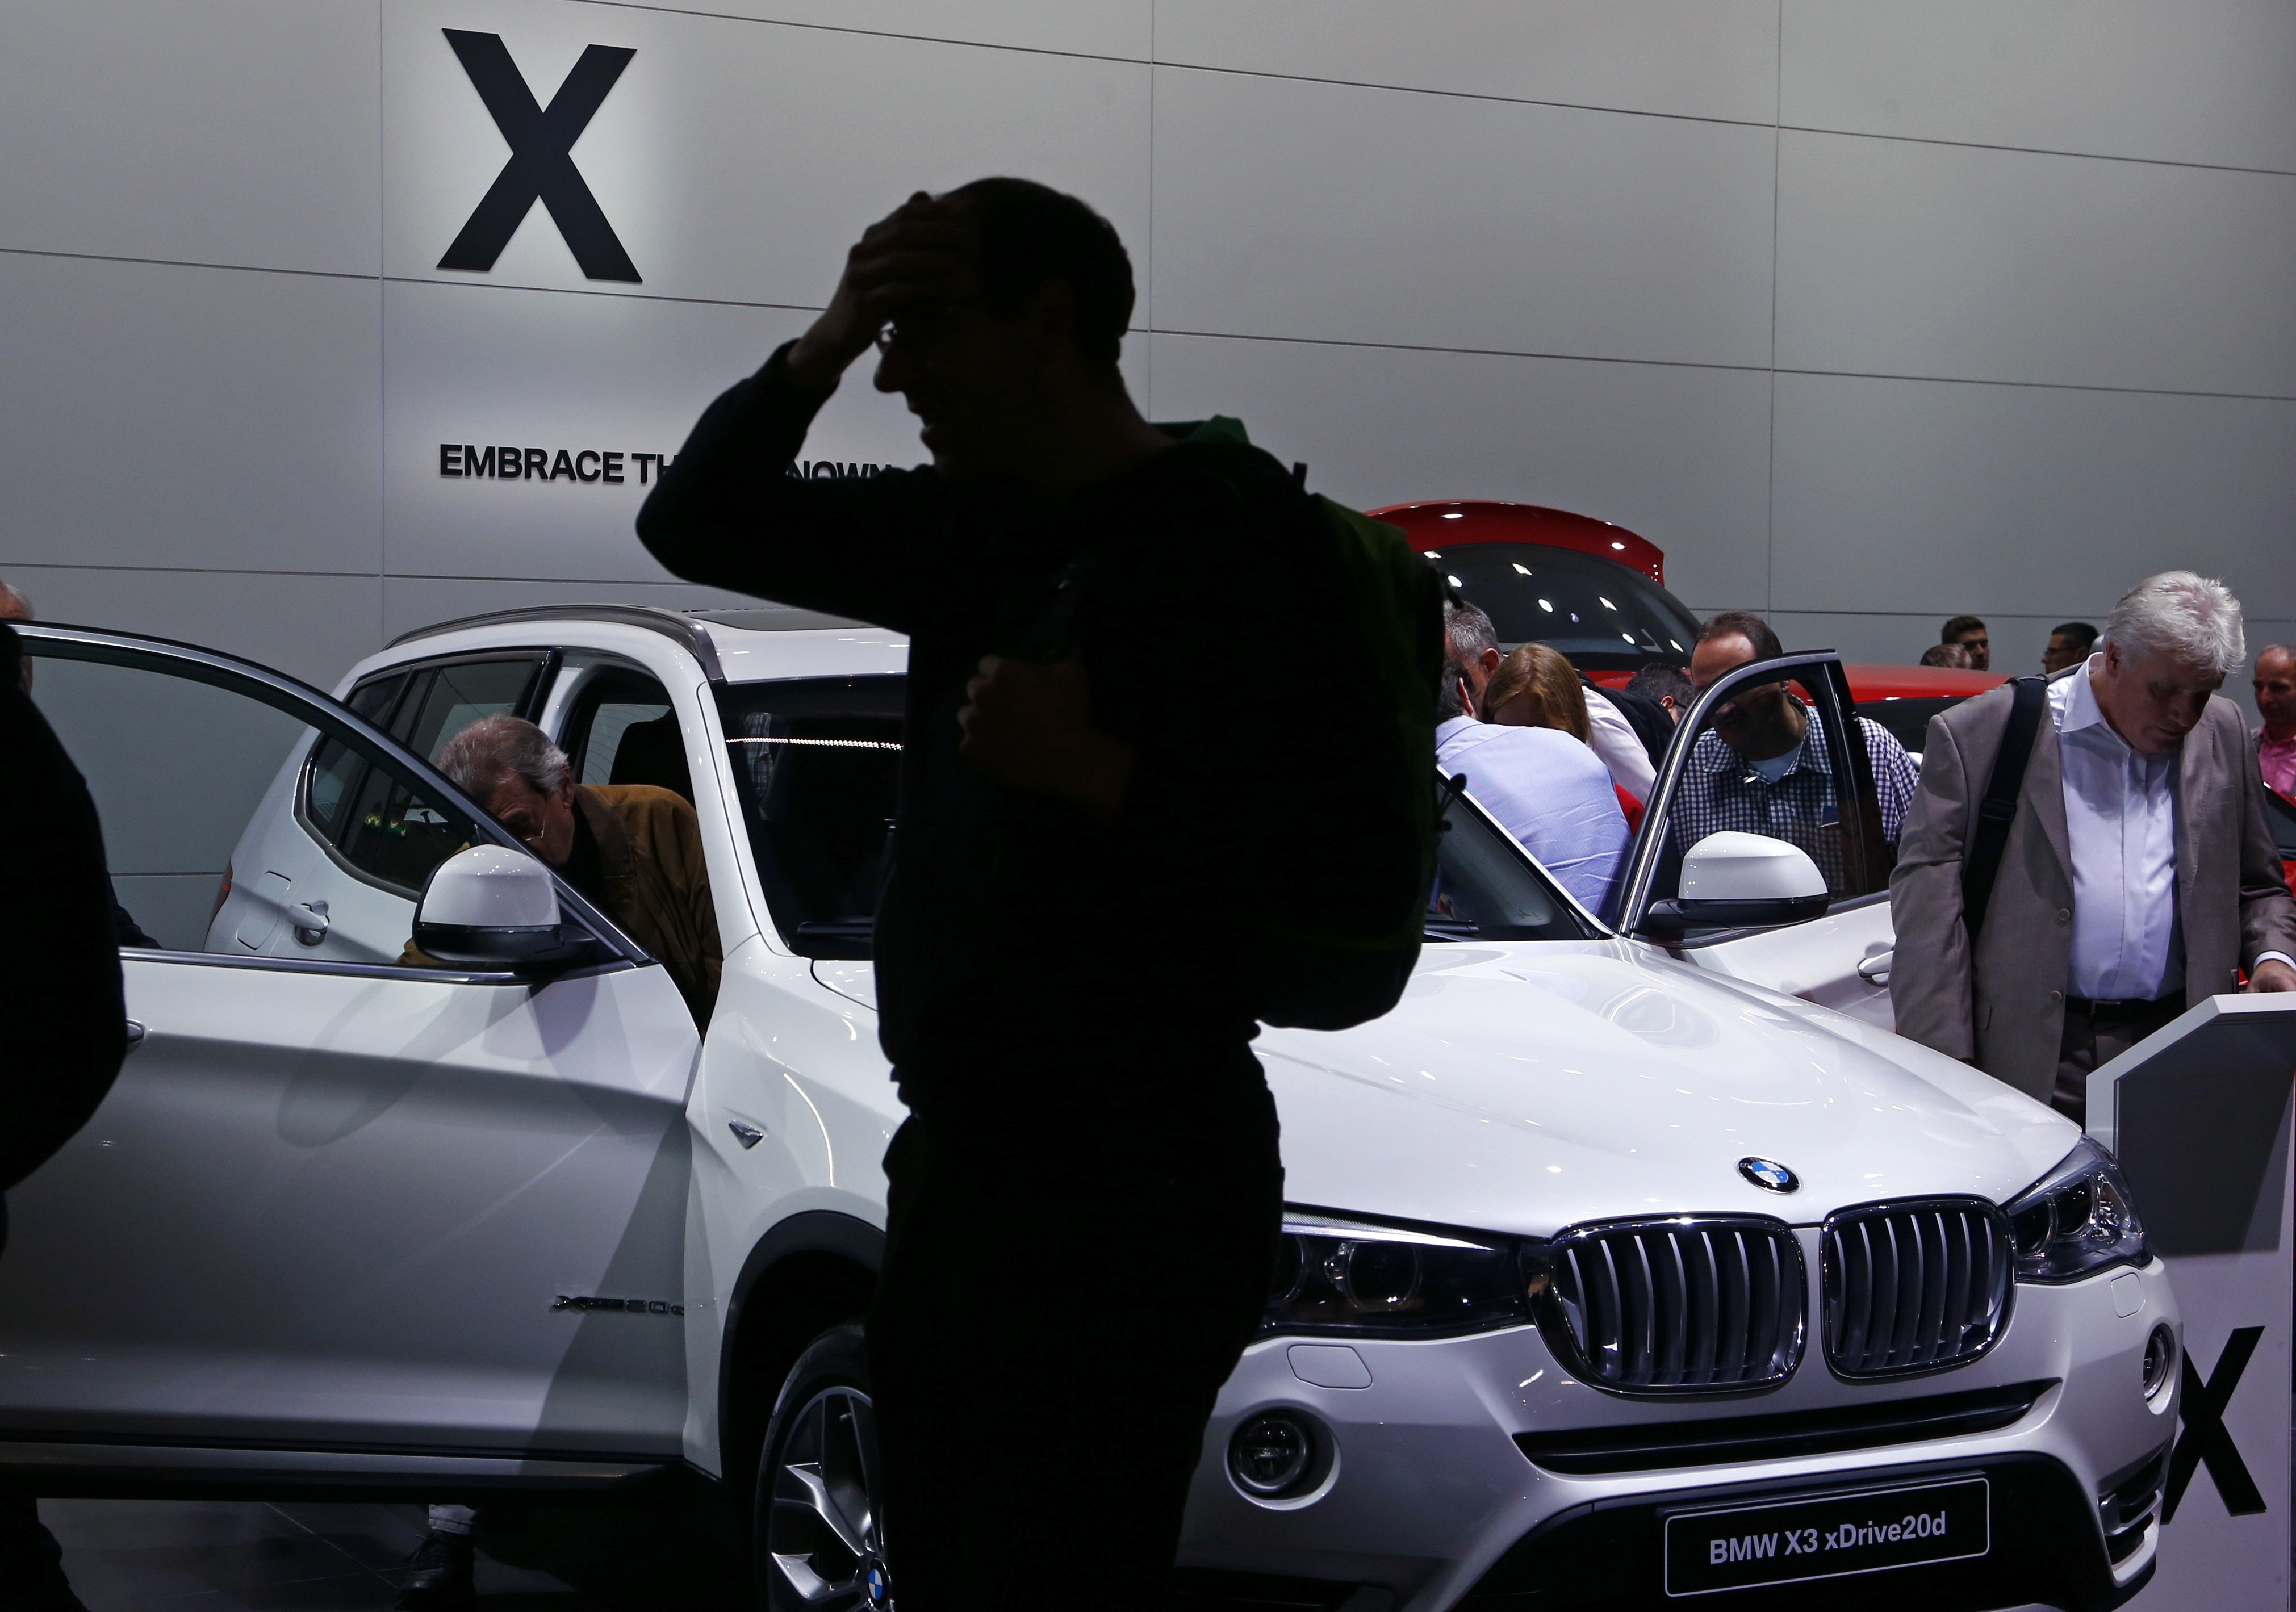 BMW faces initial proceedings over defeat device in X3 model: Bild